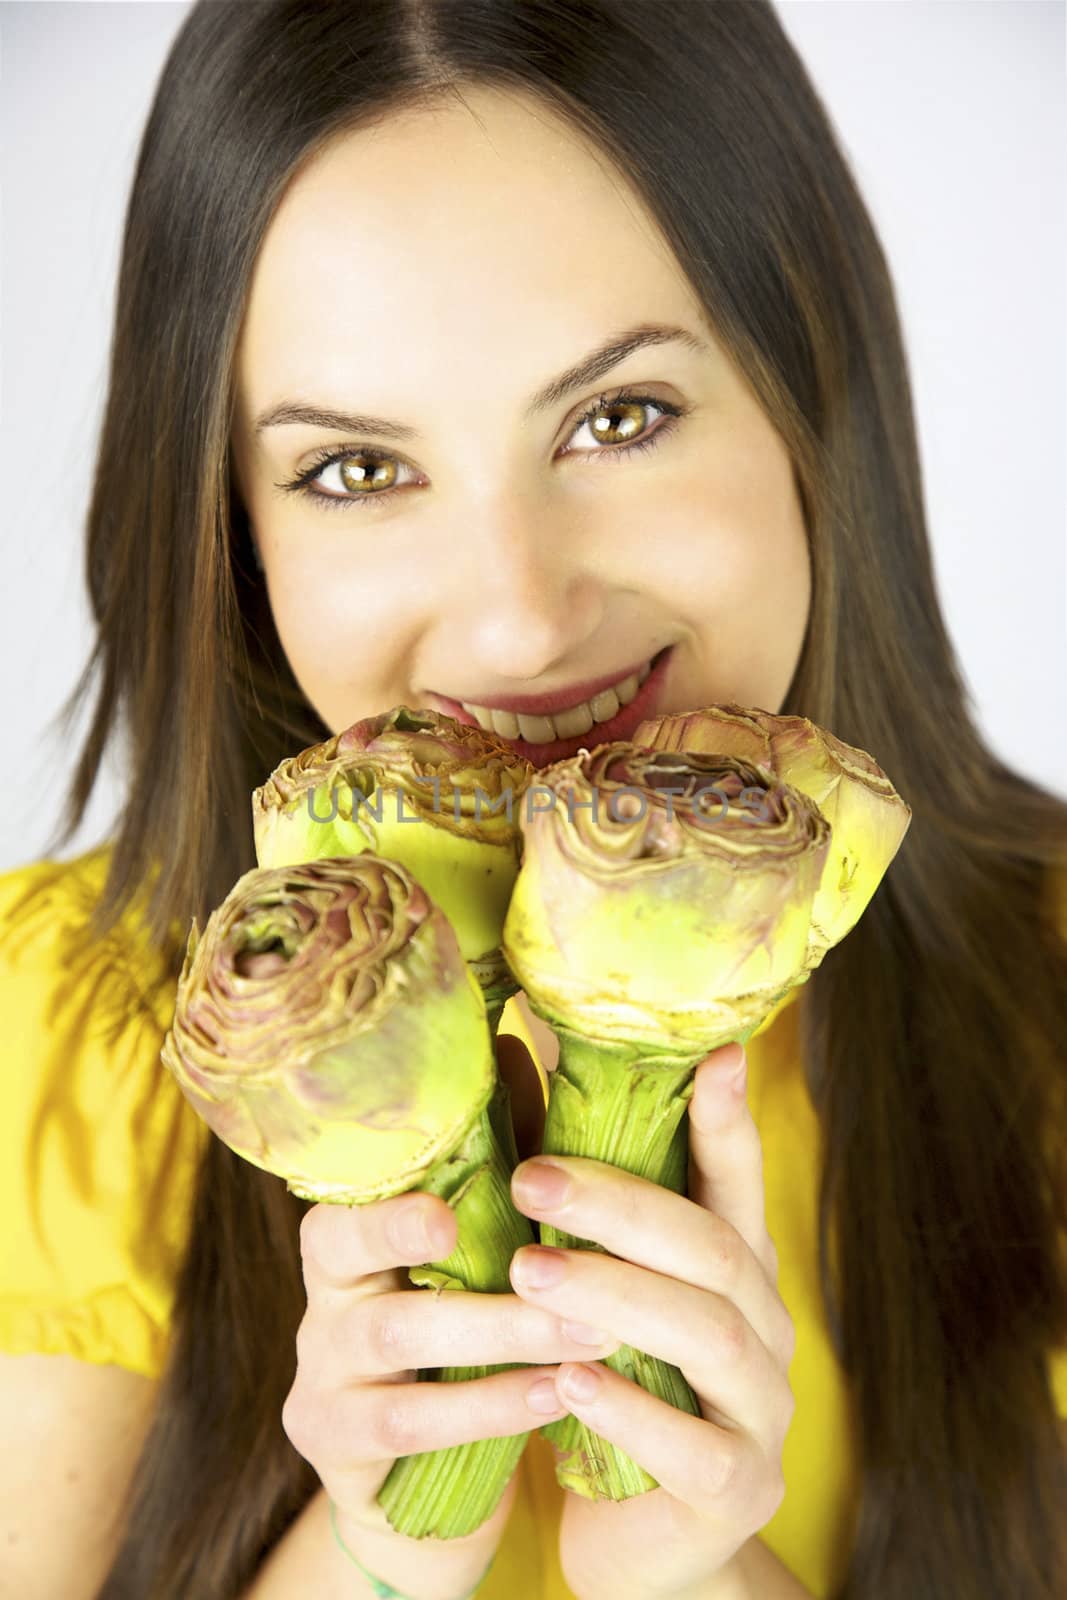 Girl with four artichokes in her hand by fmarsicano